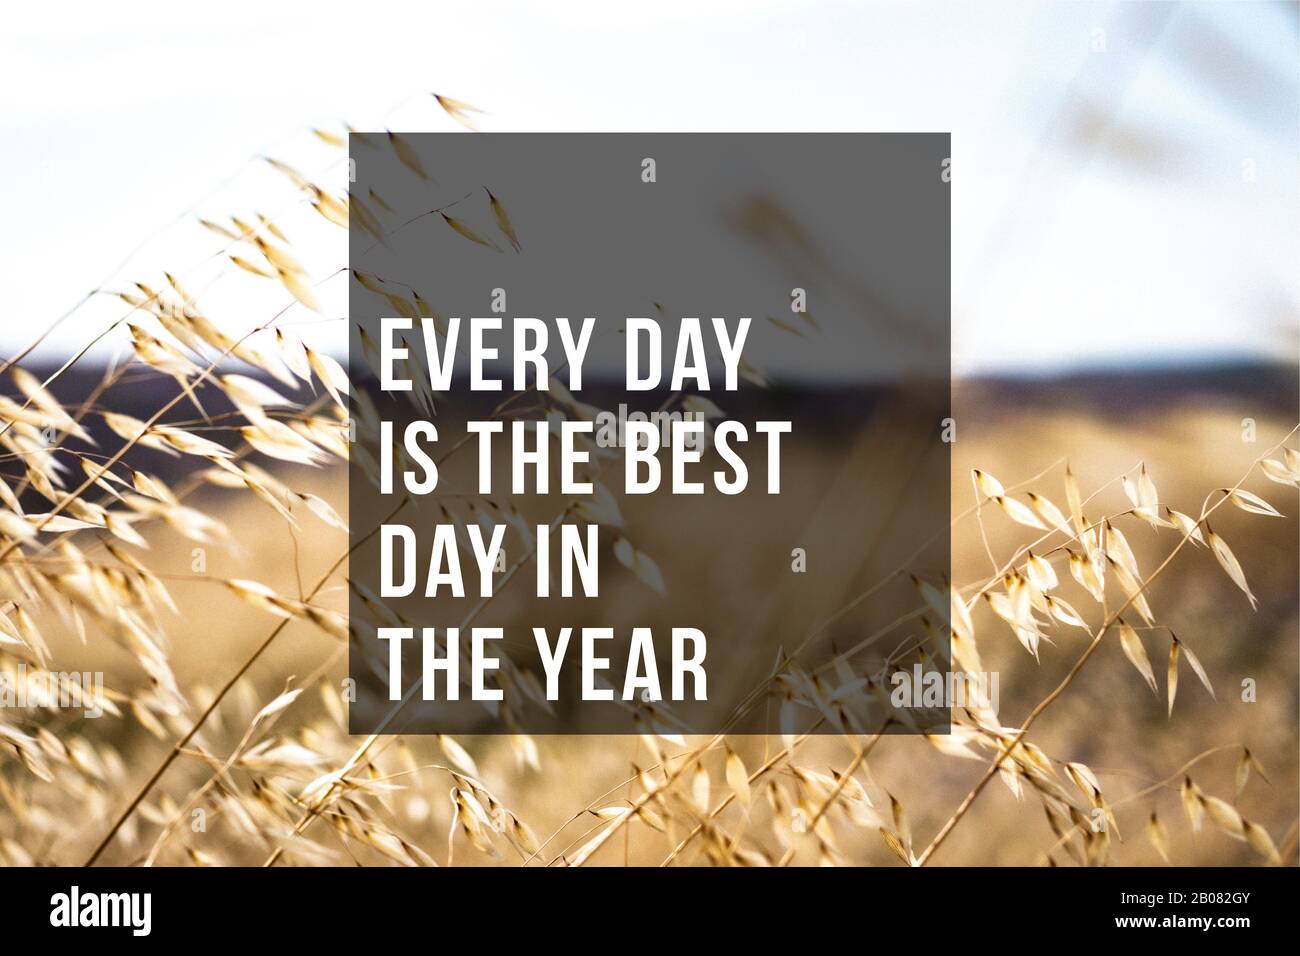 Every day is the best day in the year. Stock Photo